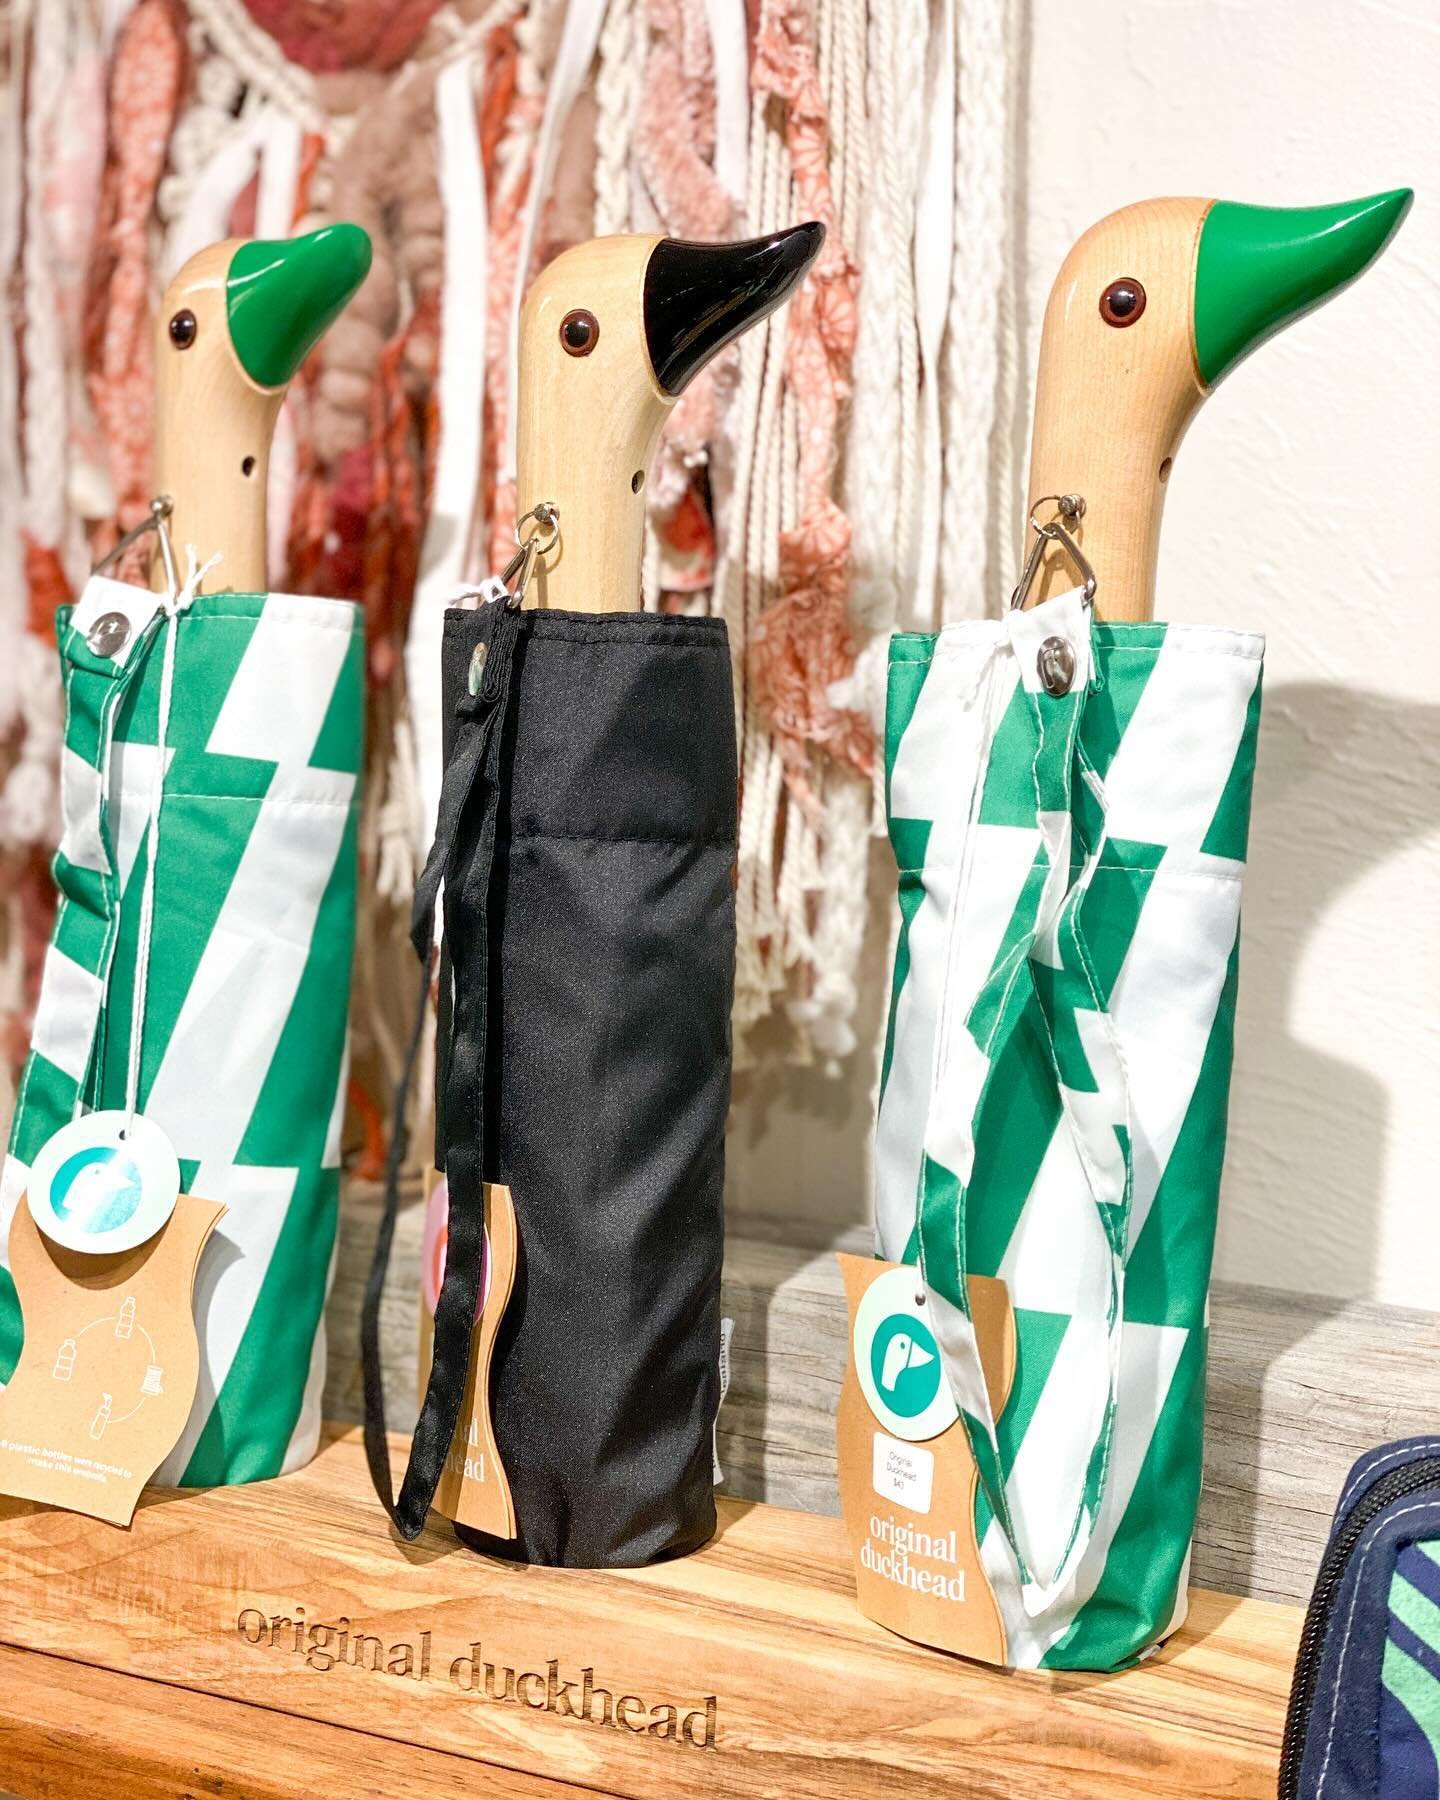 The ducks 🦆 want to come out and play!! 💦 

We love @originalduckhead How can you not smile when carrying one of these beautifully crafted umbrellas. ☔️ If you are going to be out in the rain then why not have some fun with it! 

Did you know each 